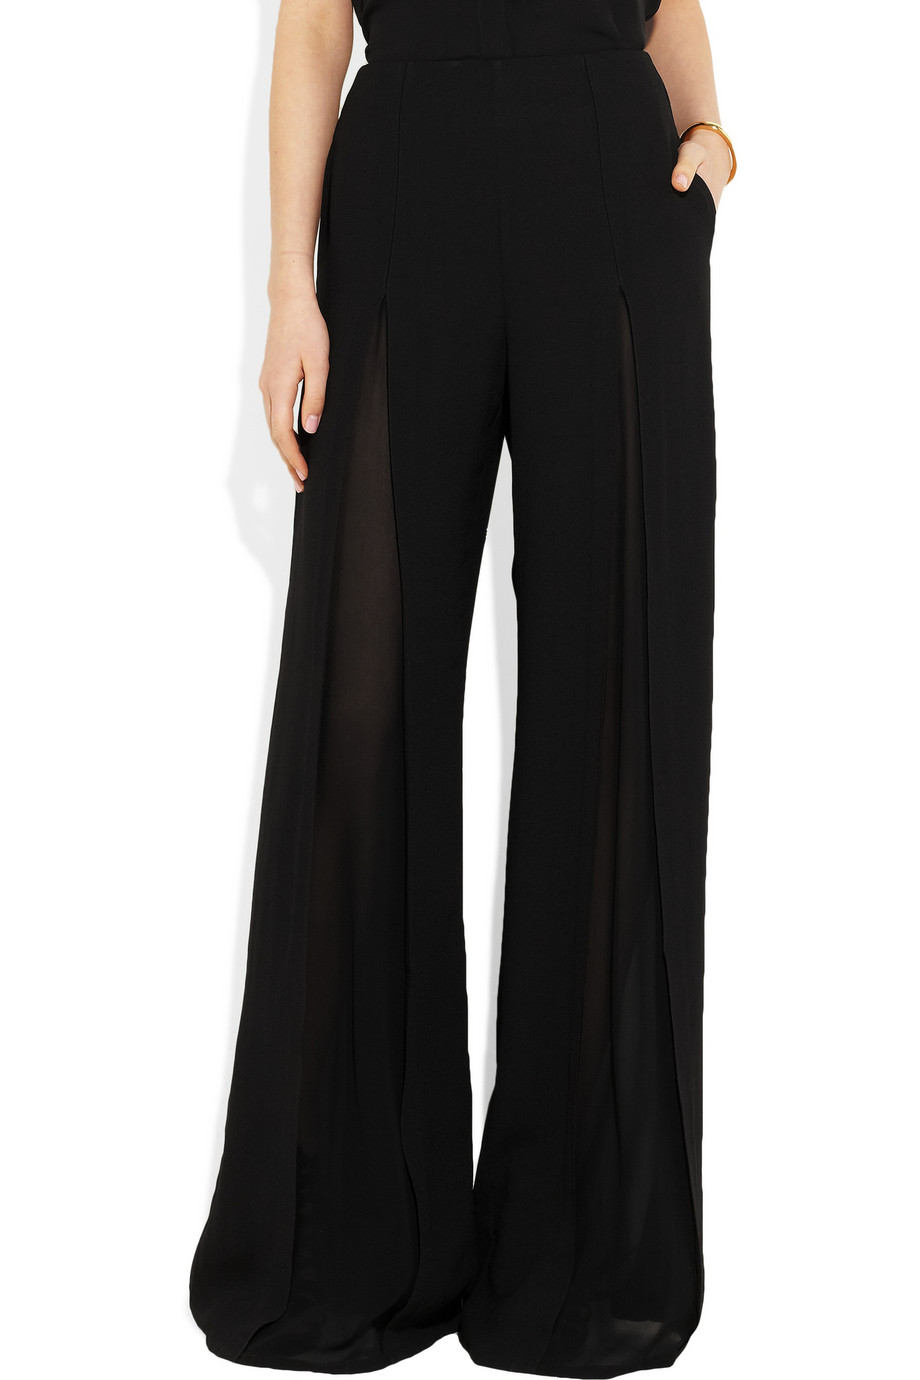 Lyst Sass And Bide As Light As Air Crepe Palazzo Pants In Black